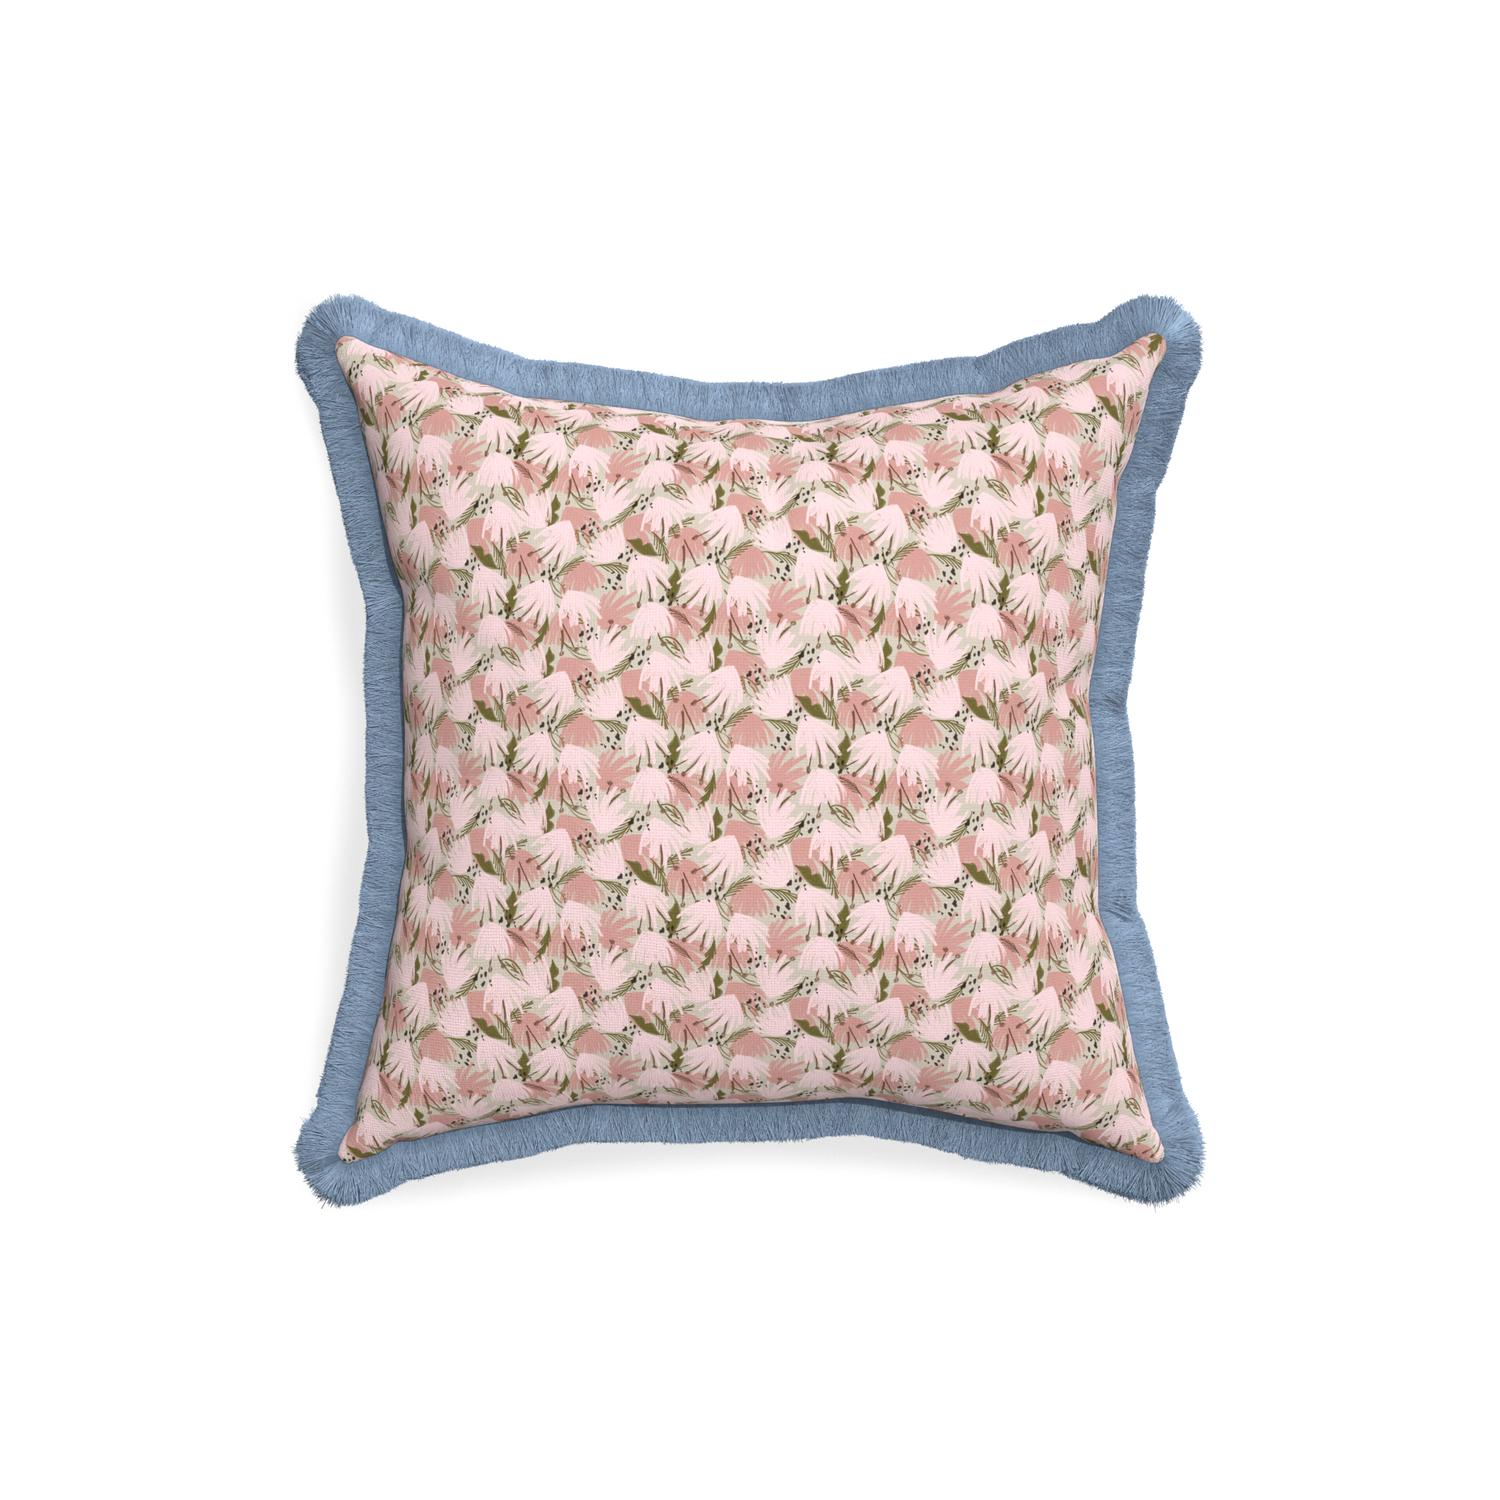 18-square eden pink custom pink floralpillow with sky fringe on white background